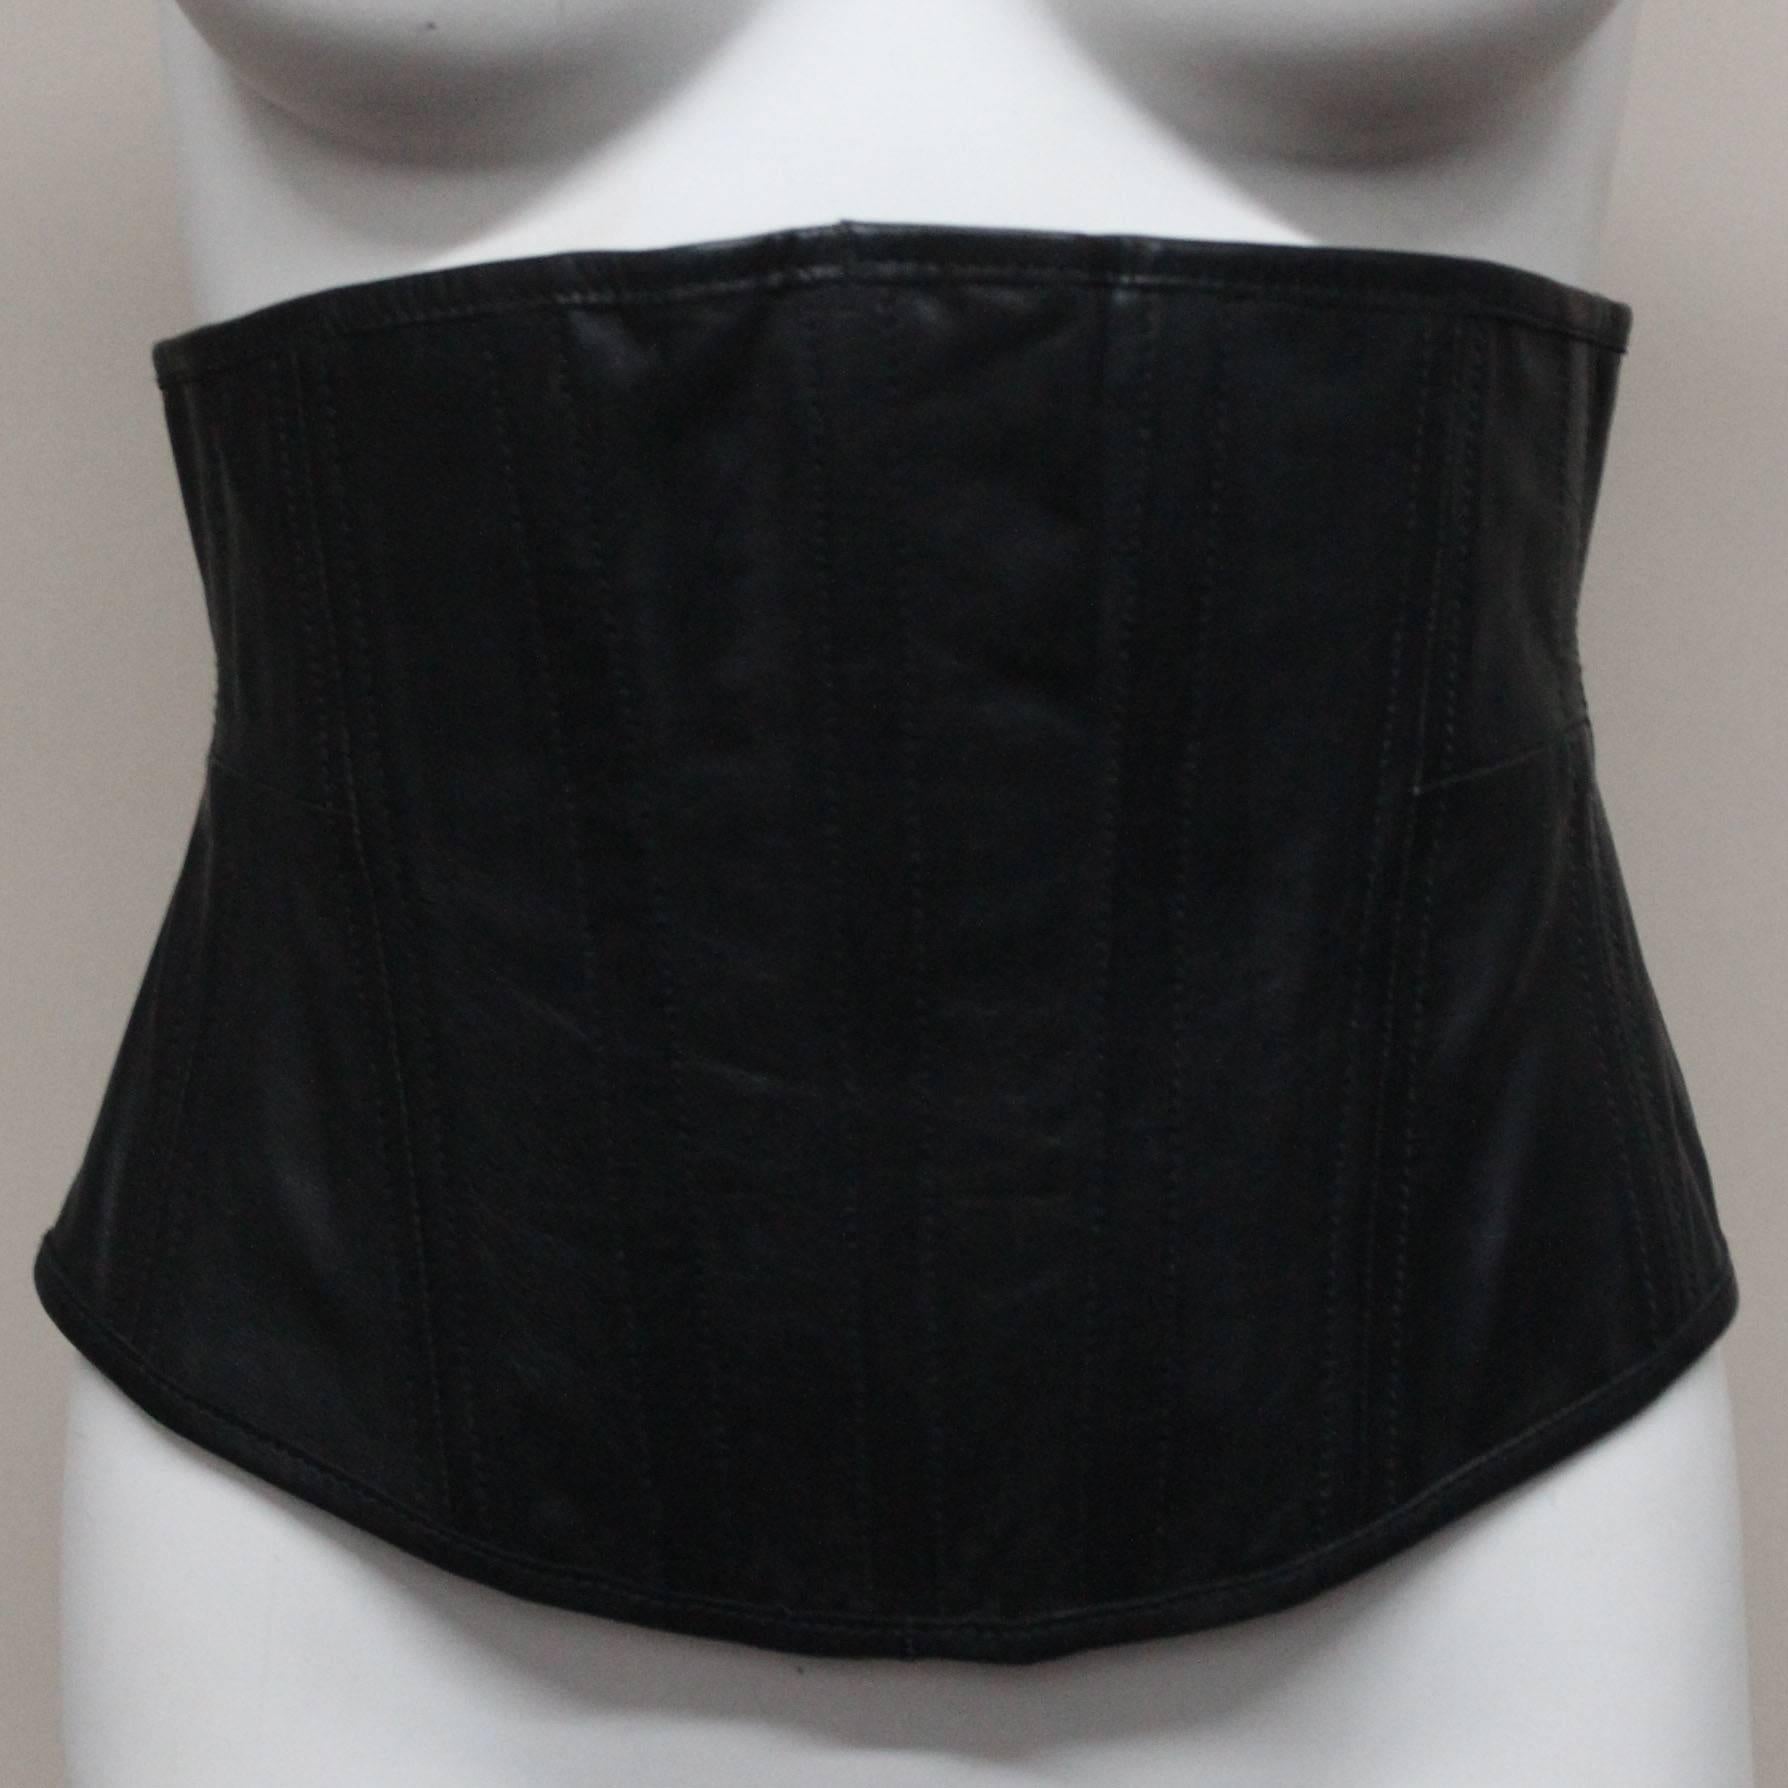 This waist cincher is pure Vivienne Westwood, a lifelong champion of corsetry. It features a back zipper and mesh panels, and the front is lambskin leather. It fits snugly just under the bust and sits on the hips. It shapes the wearer into a perfect